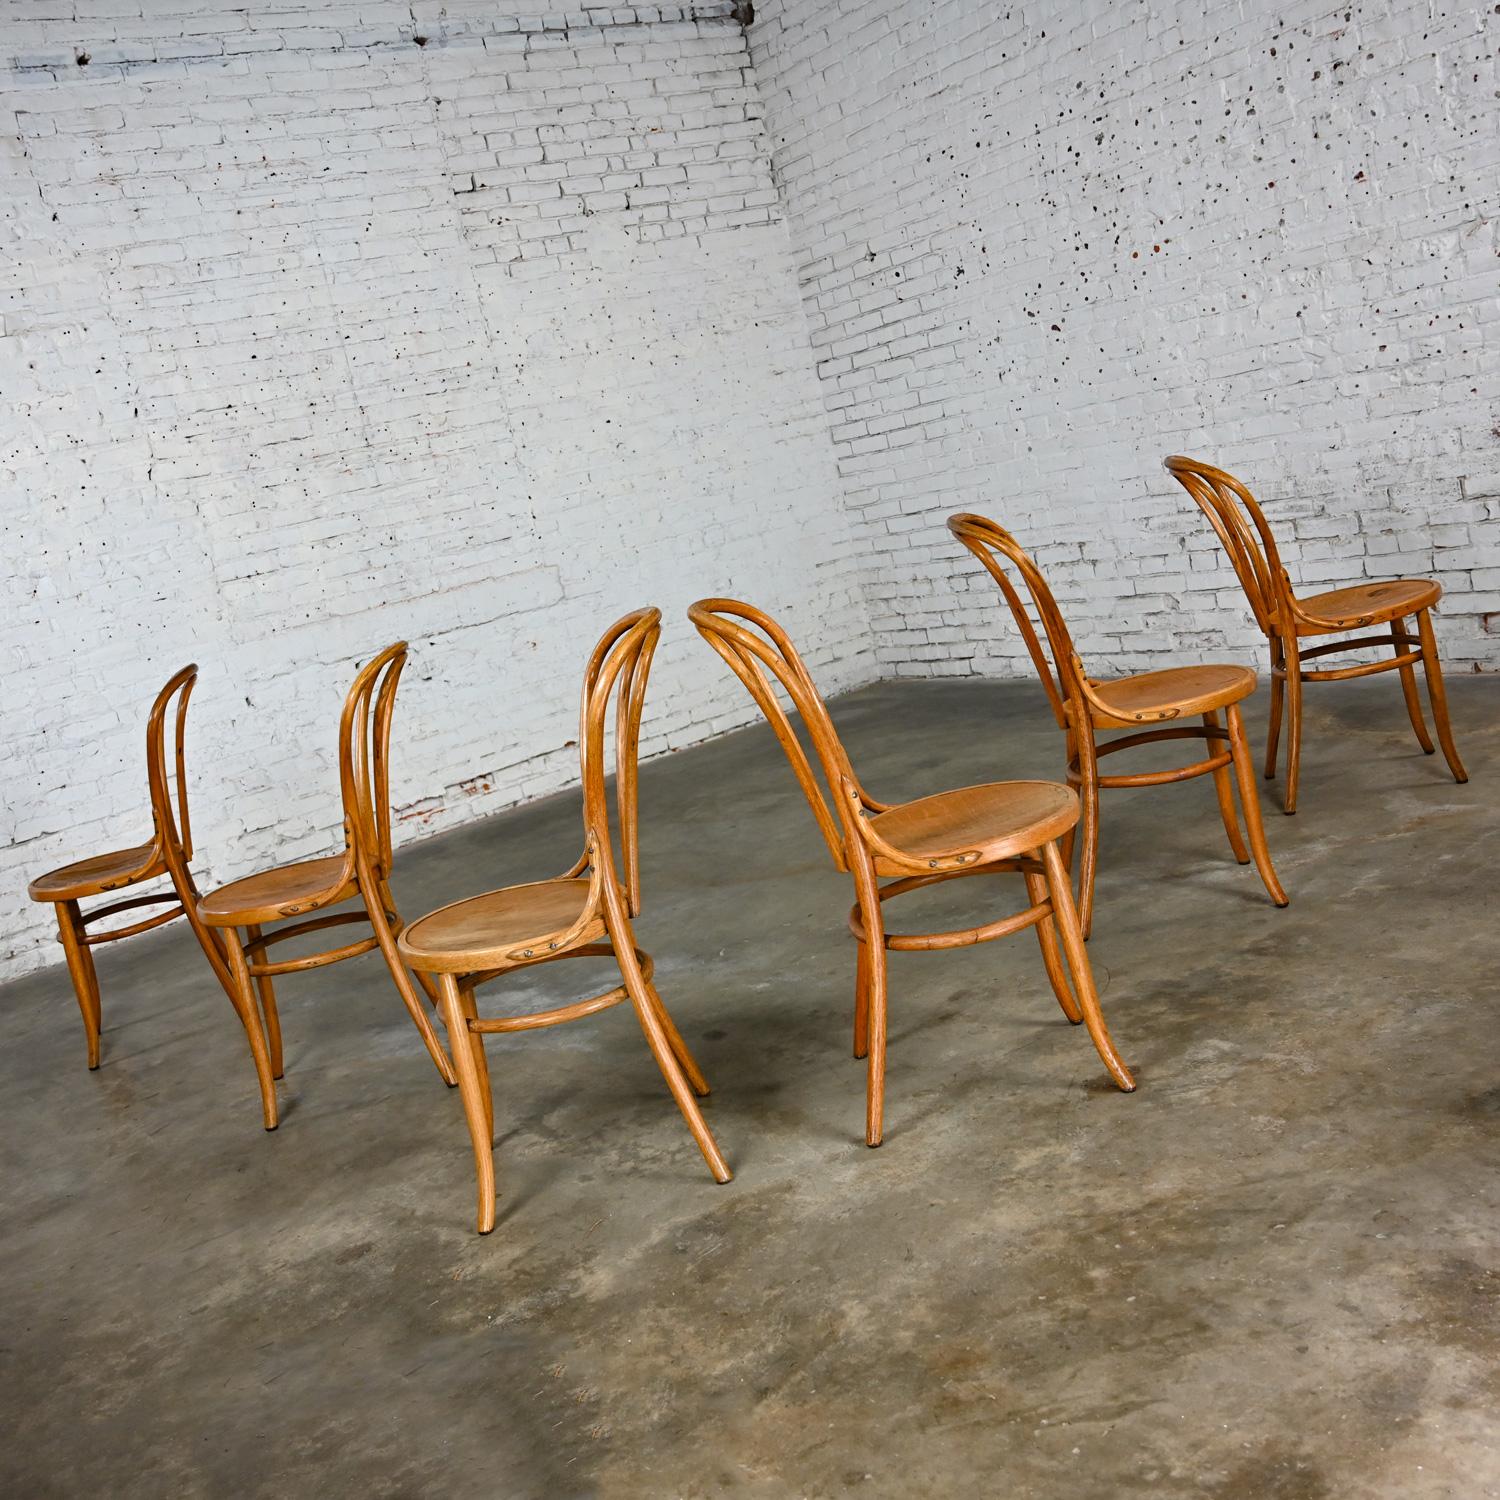 Bauhaus Oak Bentwood Chairs Attributed to Thonet #18 Café Chair Set of 6 For Sale 7